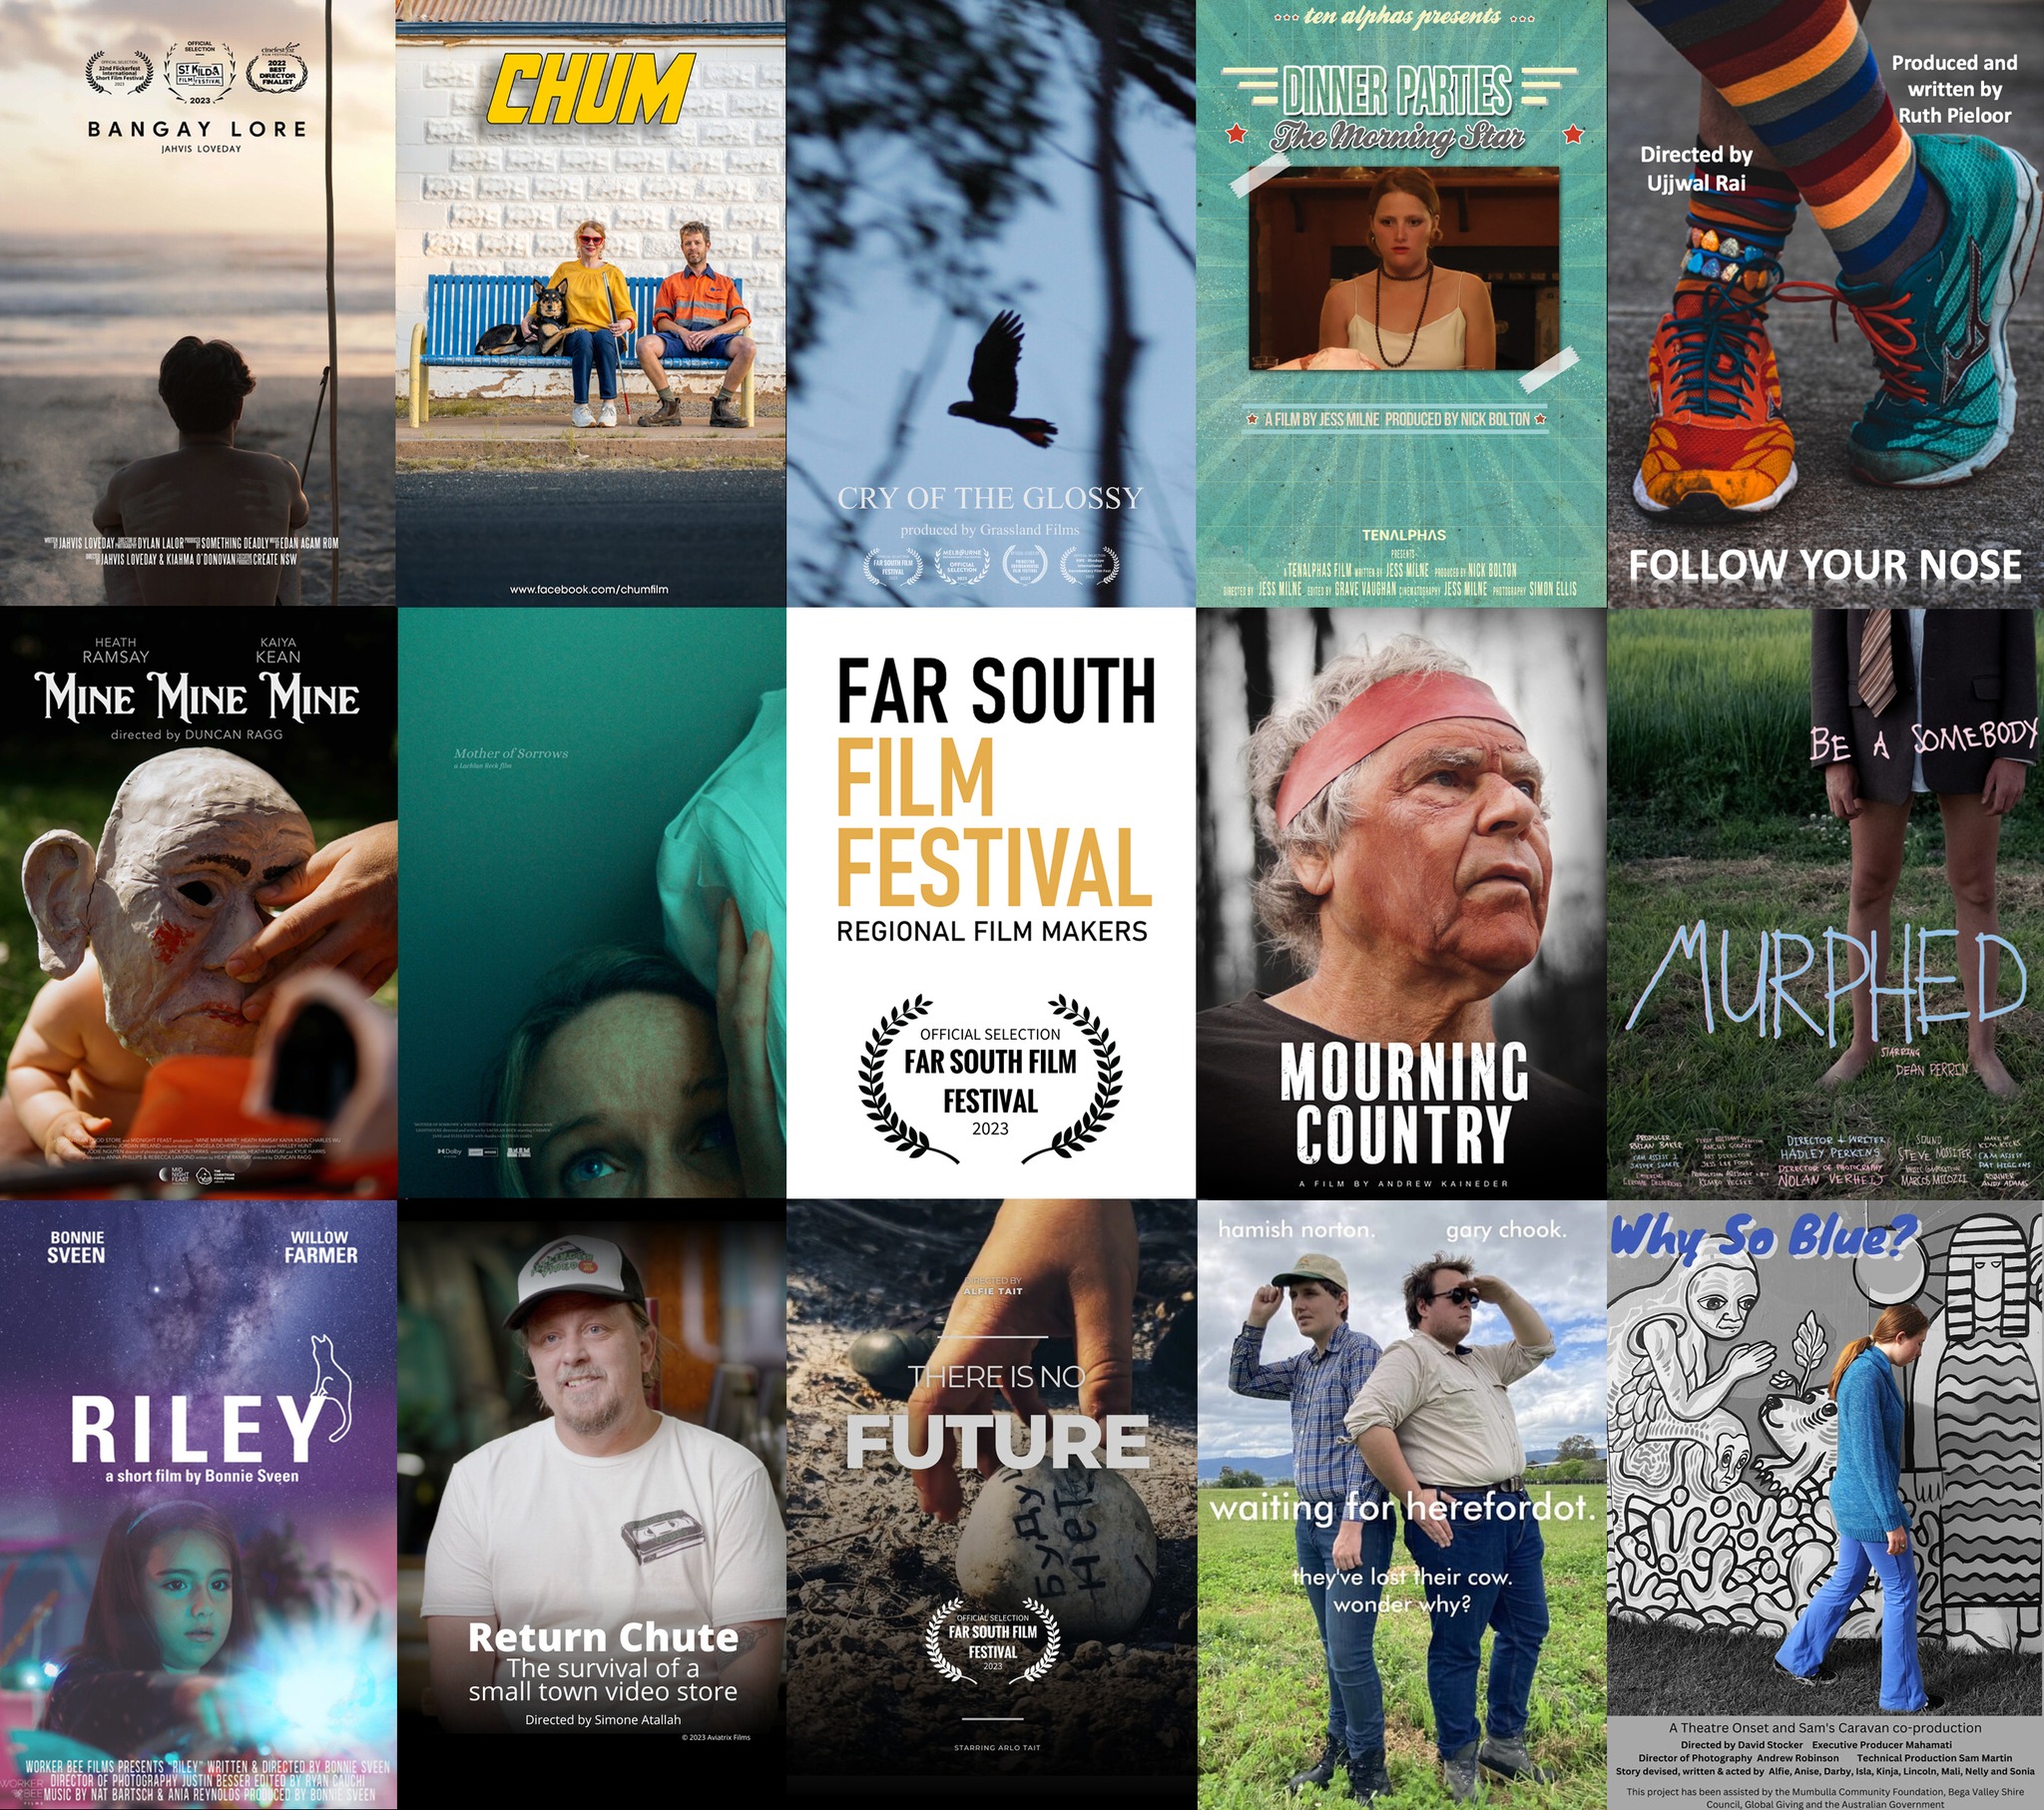 Return Chute documentary teaser is in a collage of posters of finalists for the Far South Film Festival 2023.